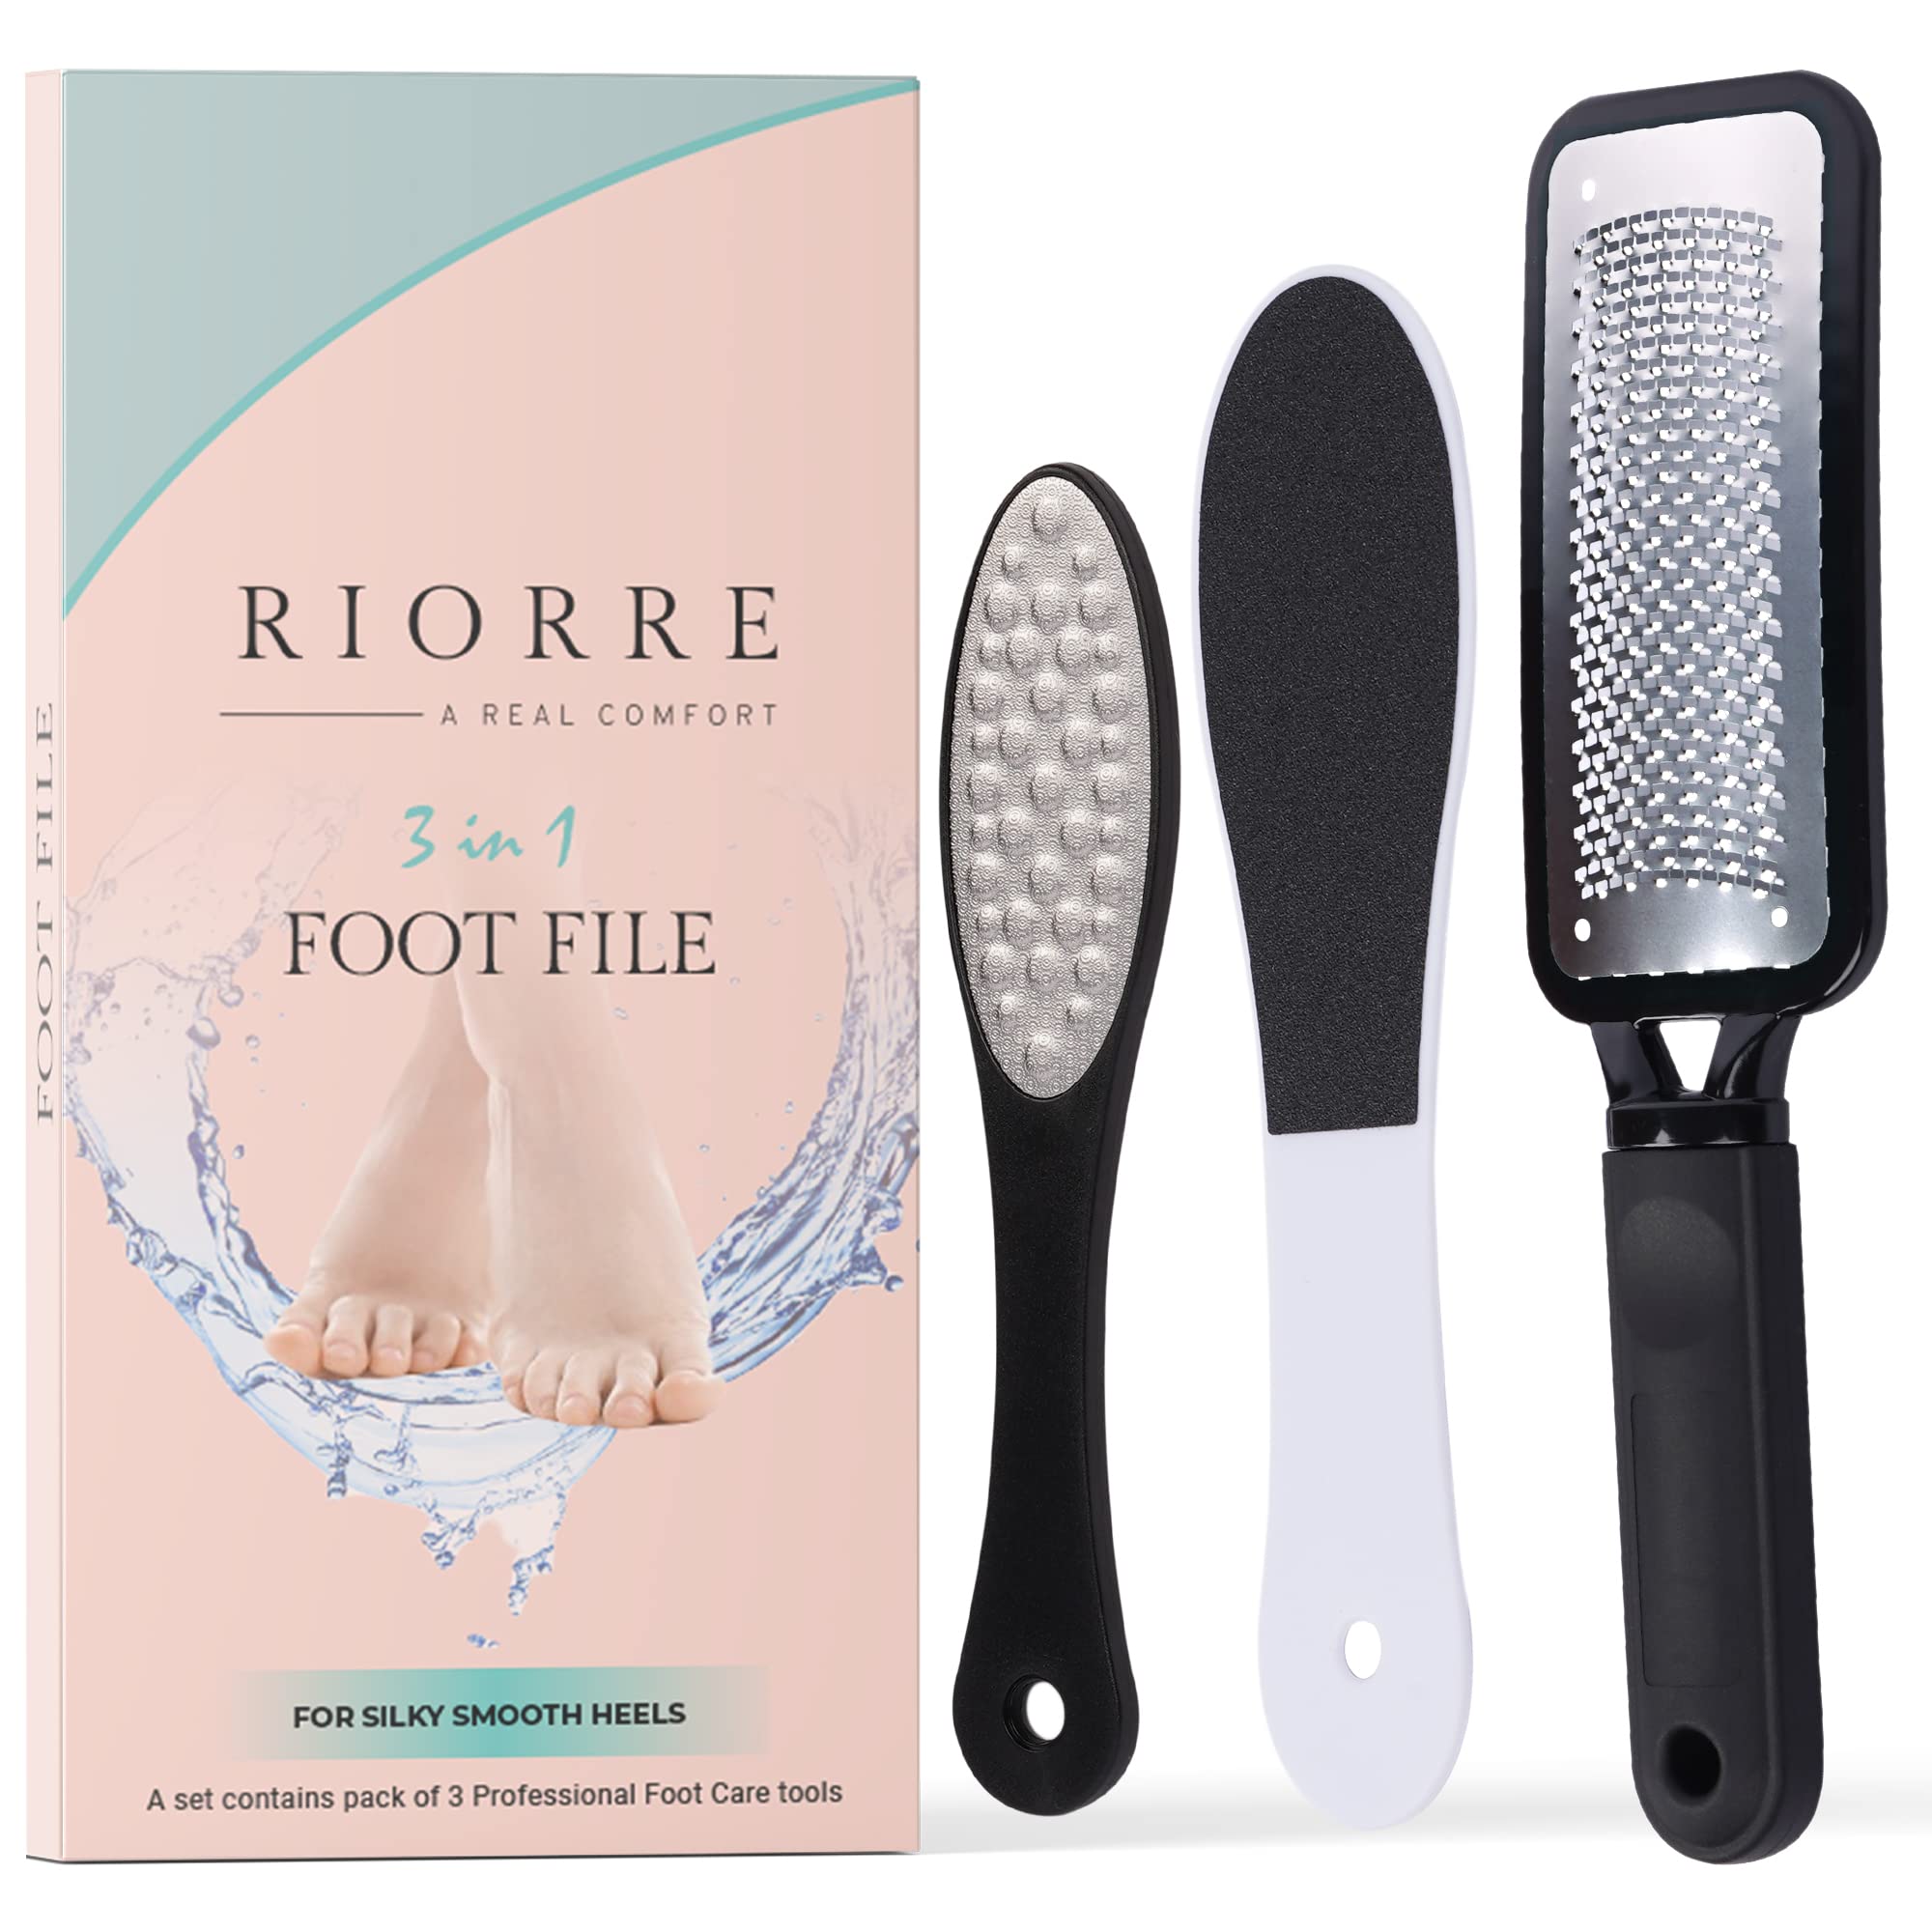 Riorre Professional Foot Files for Hard Skin - Premium 3 in 1 Pedicure Foot File , Scrubber and Foot Scraper for Soft & Smooth Heels